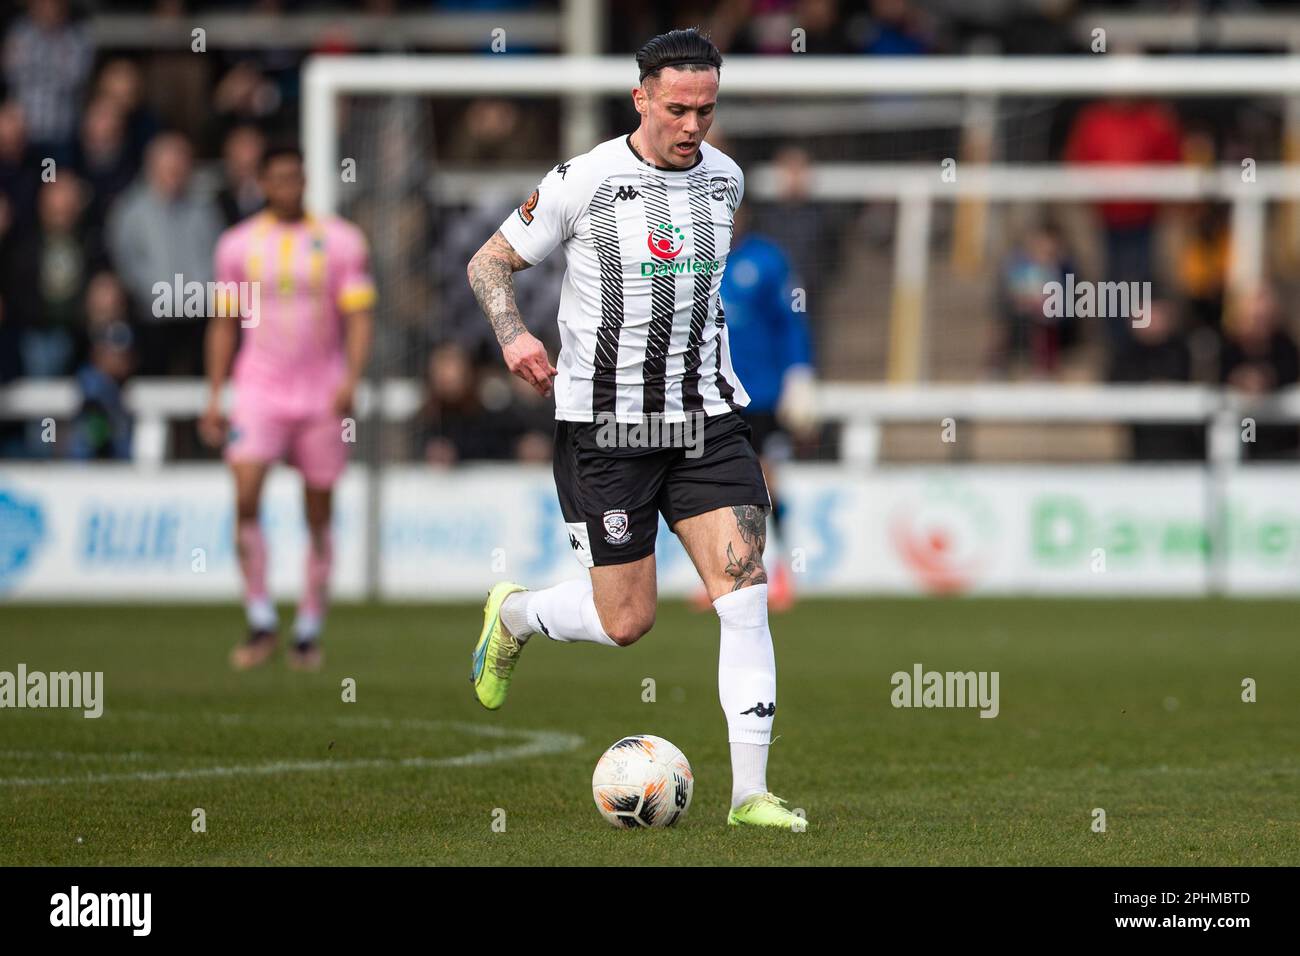 Hereford Football Club player Miles Storey during a Vanarama National League North fixture. Photo by Craig Anthony. Stock Photo